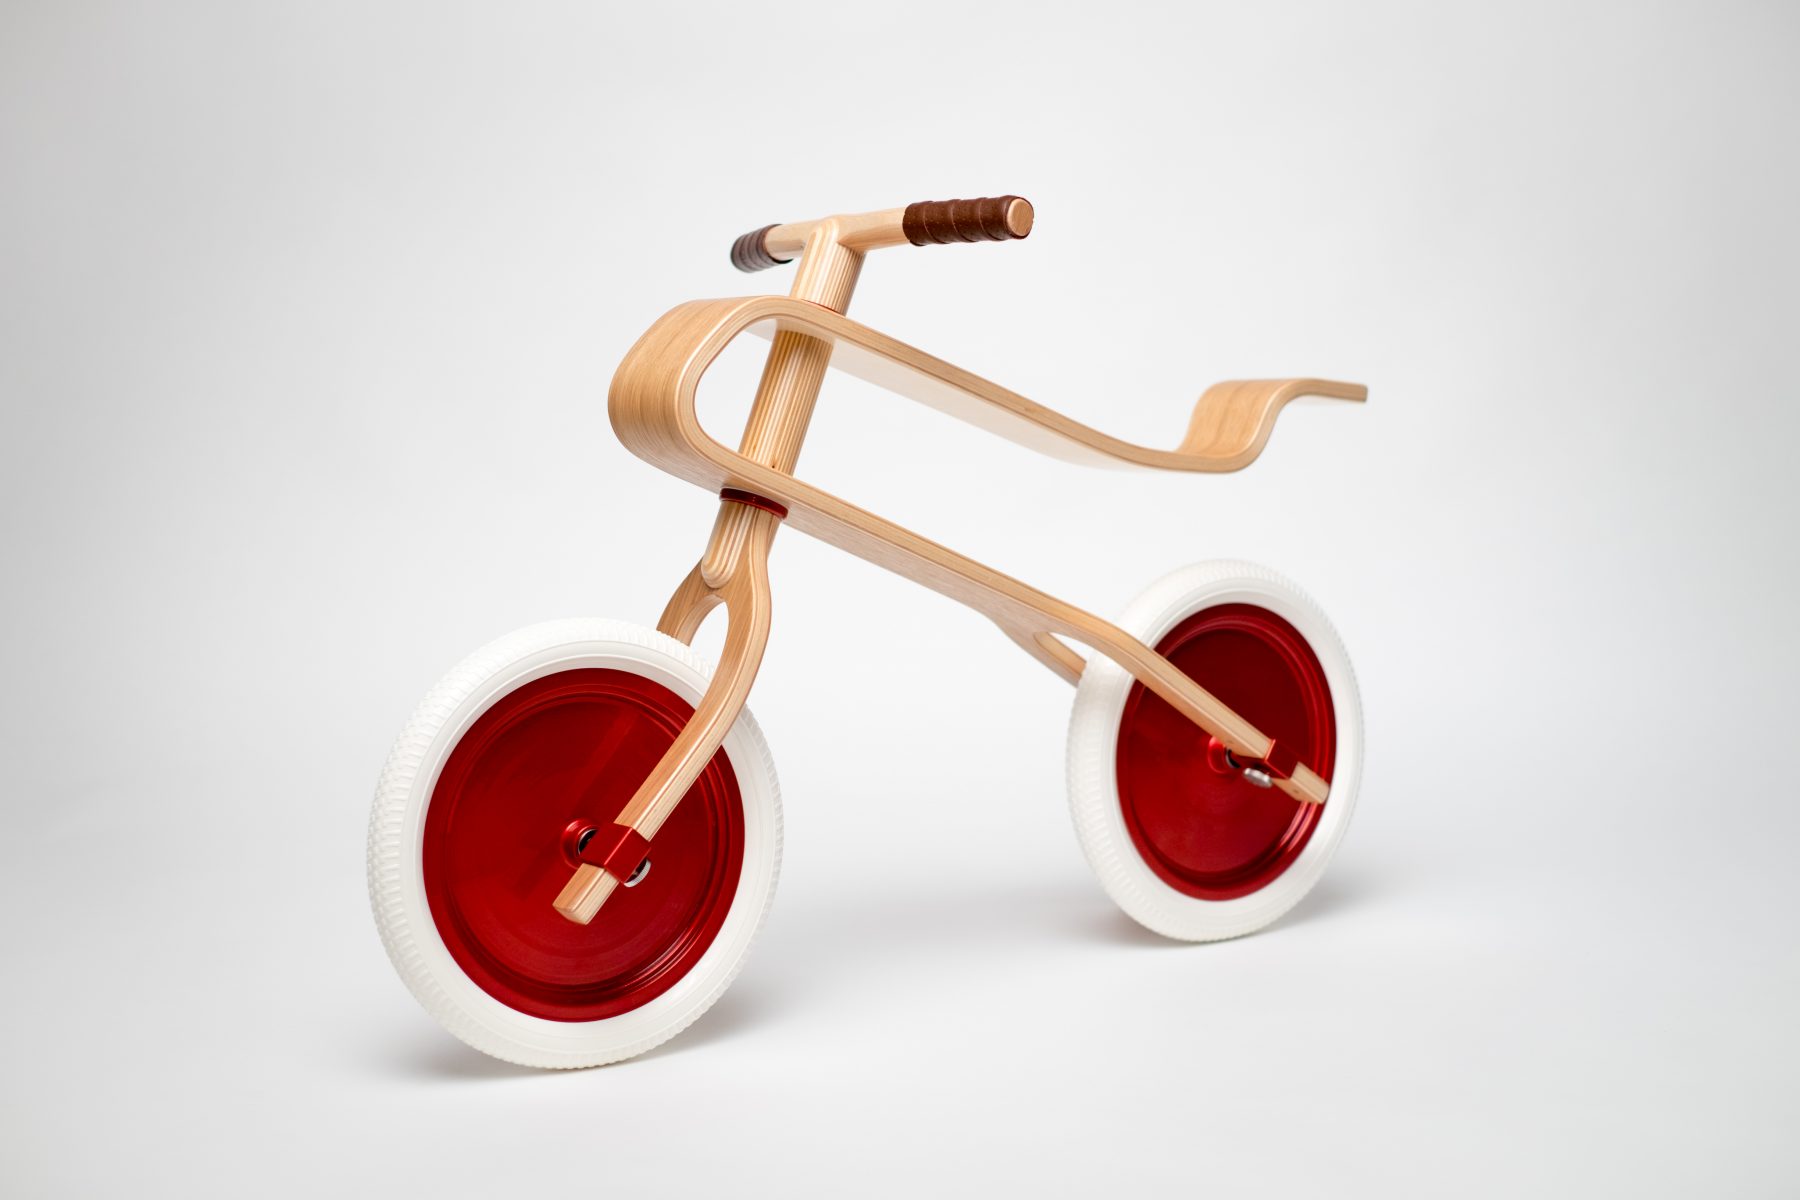 kids toy bicycle